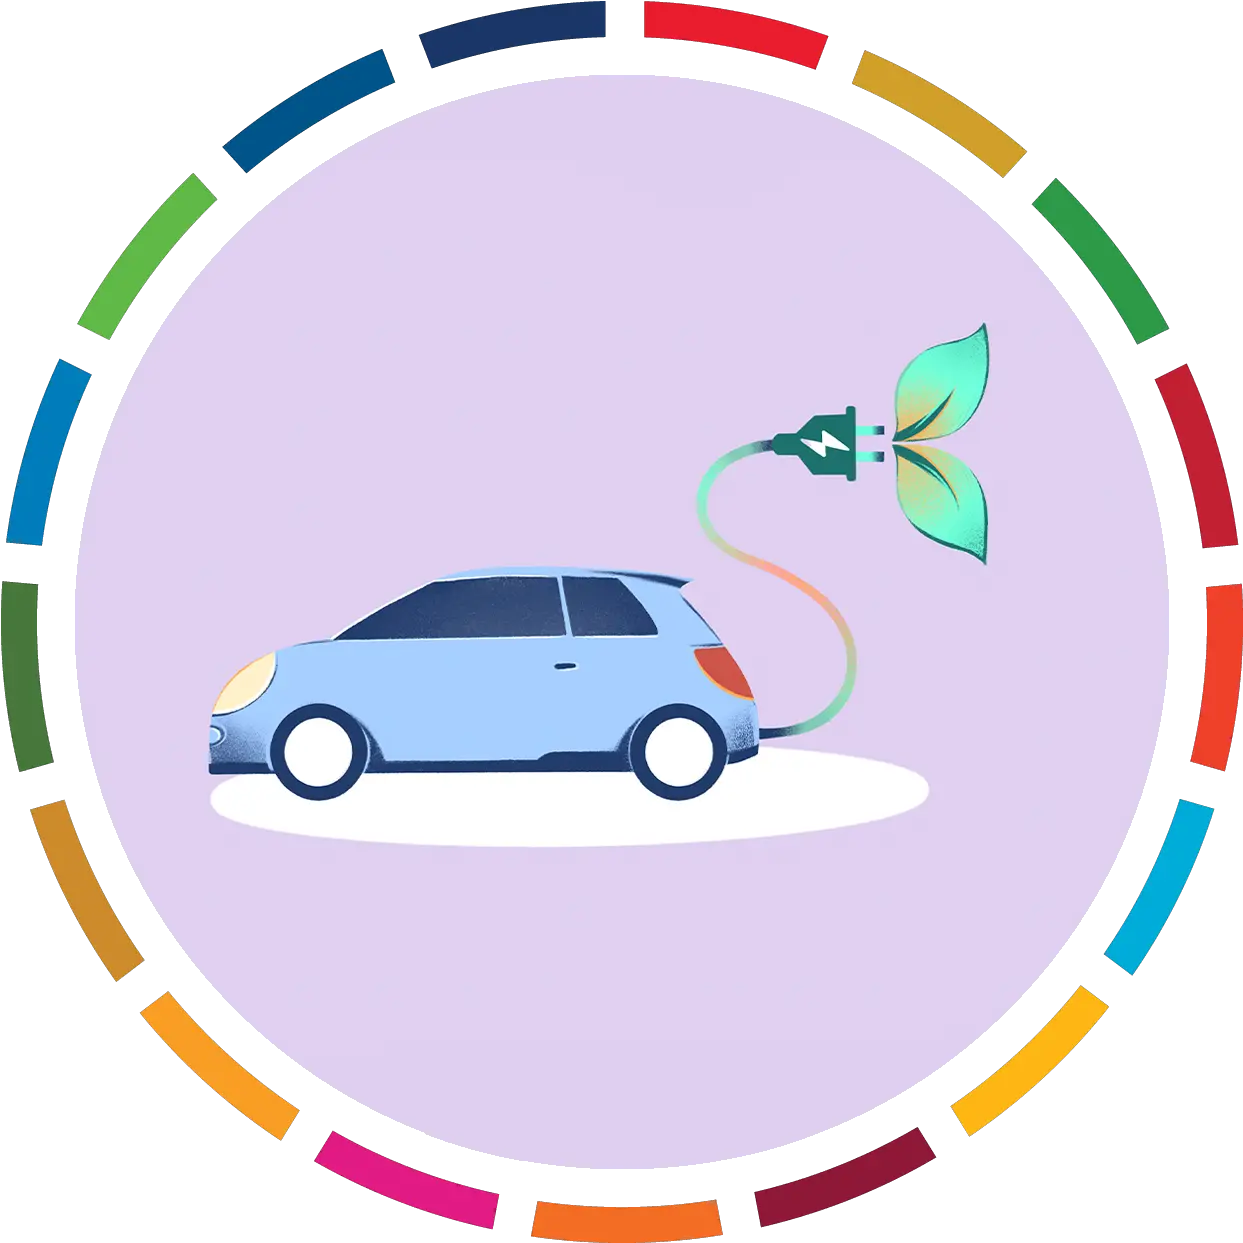 Start With These Ten Actions United Nations Youth For Global Goals Png Walk Car Train Icon